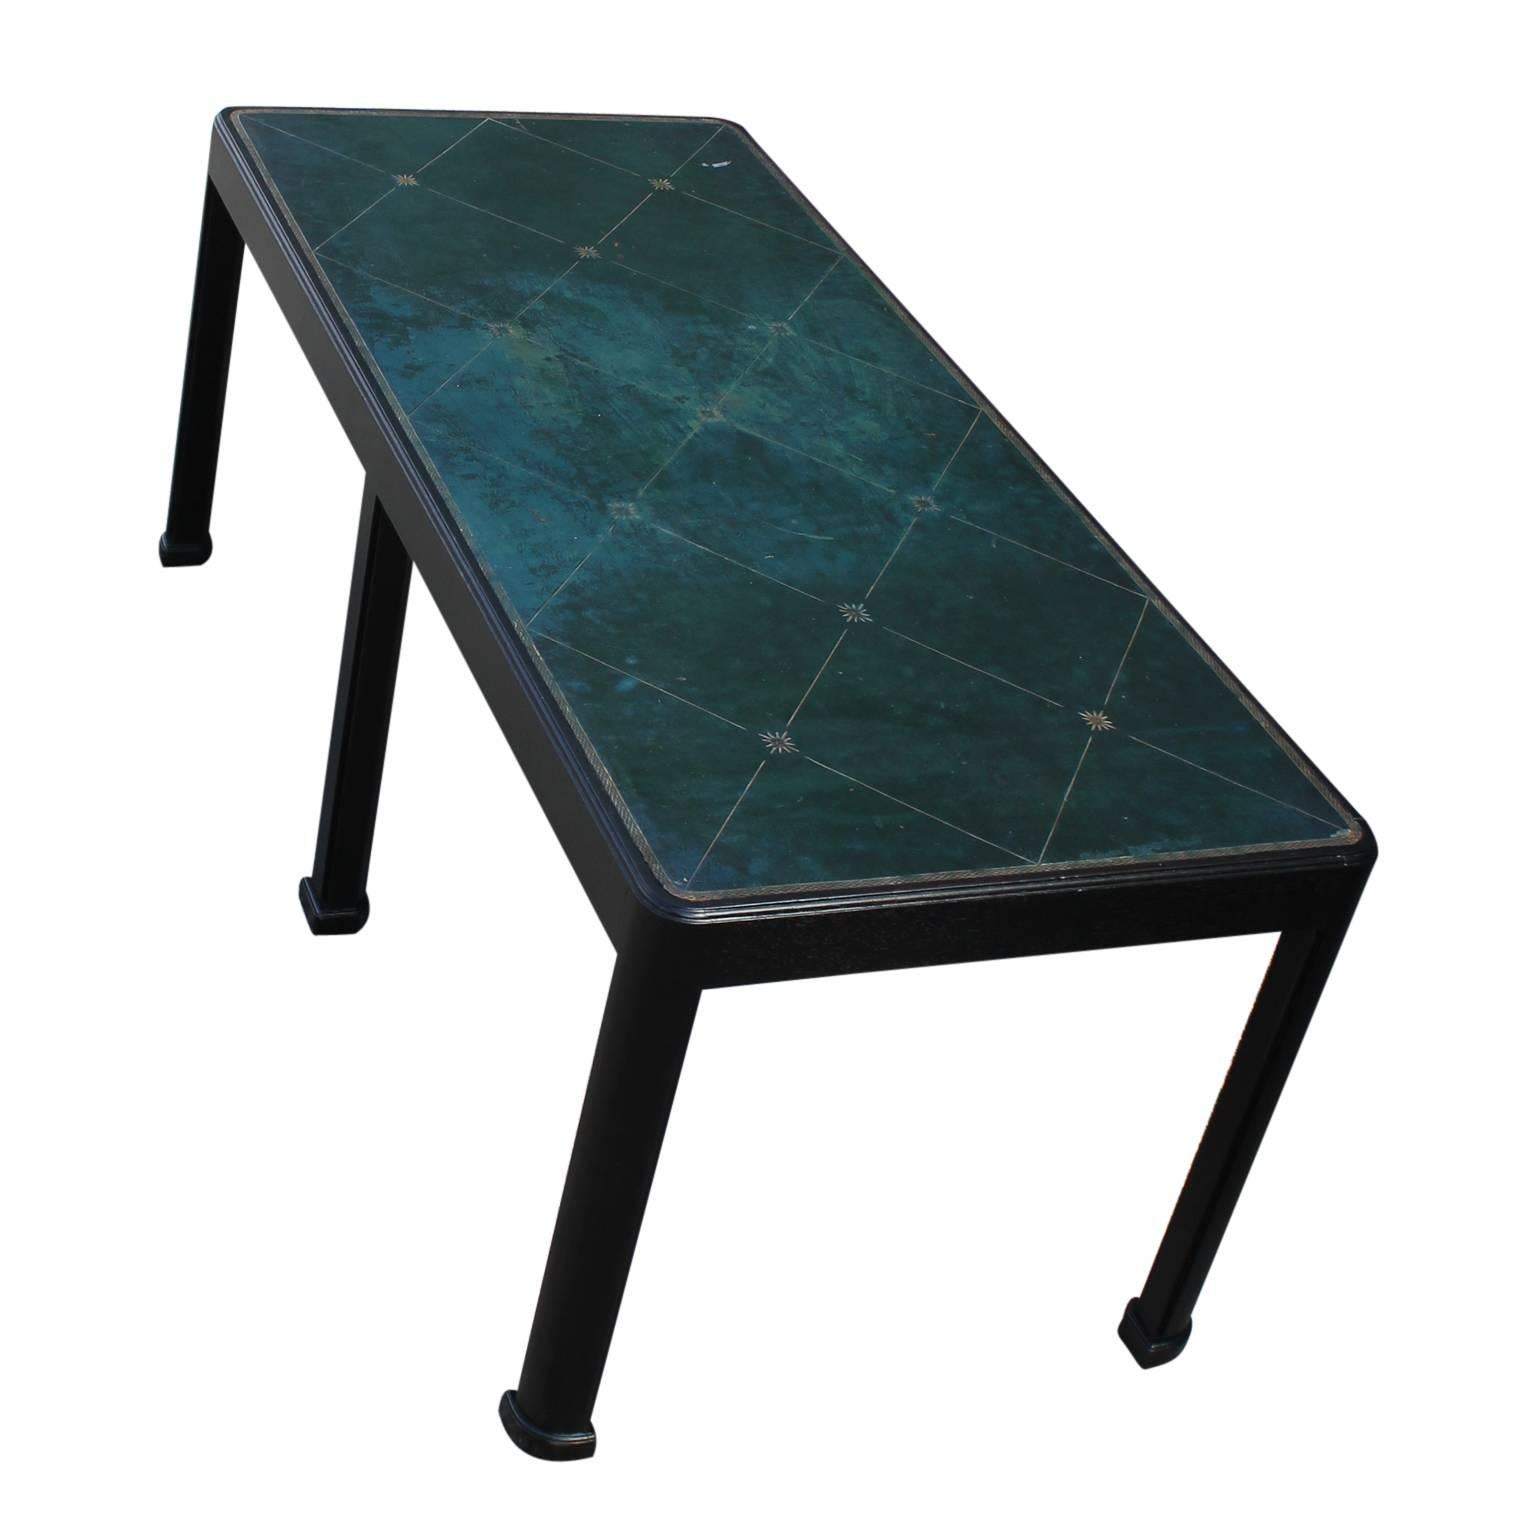 Hollywood Regency Modern Rectangular Leather Topped Tommi Parzinger Style Ebony Coffee Table 